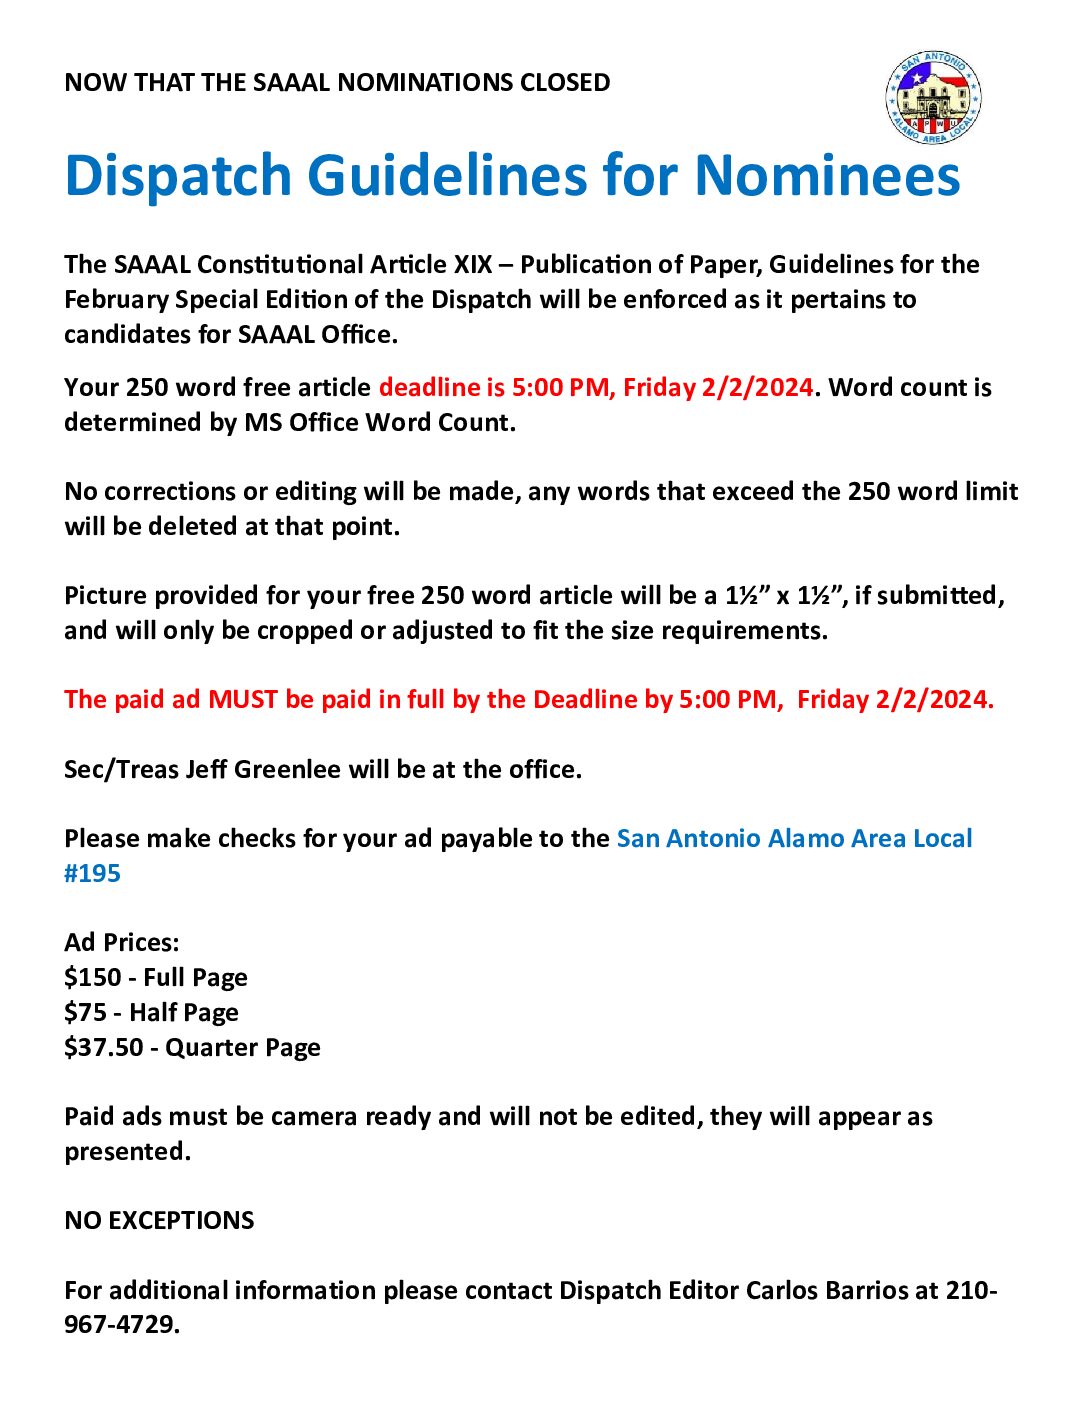 Nominees Dispatch Guidelines - 